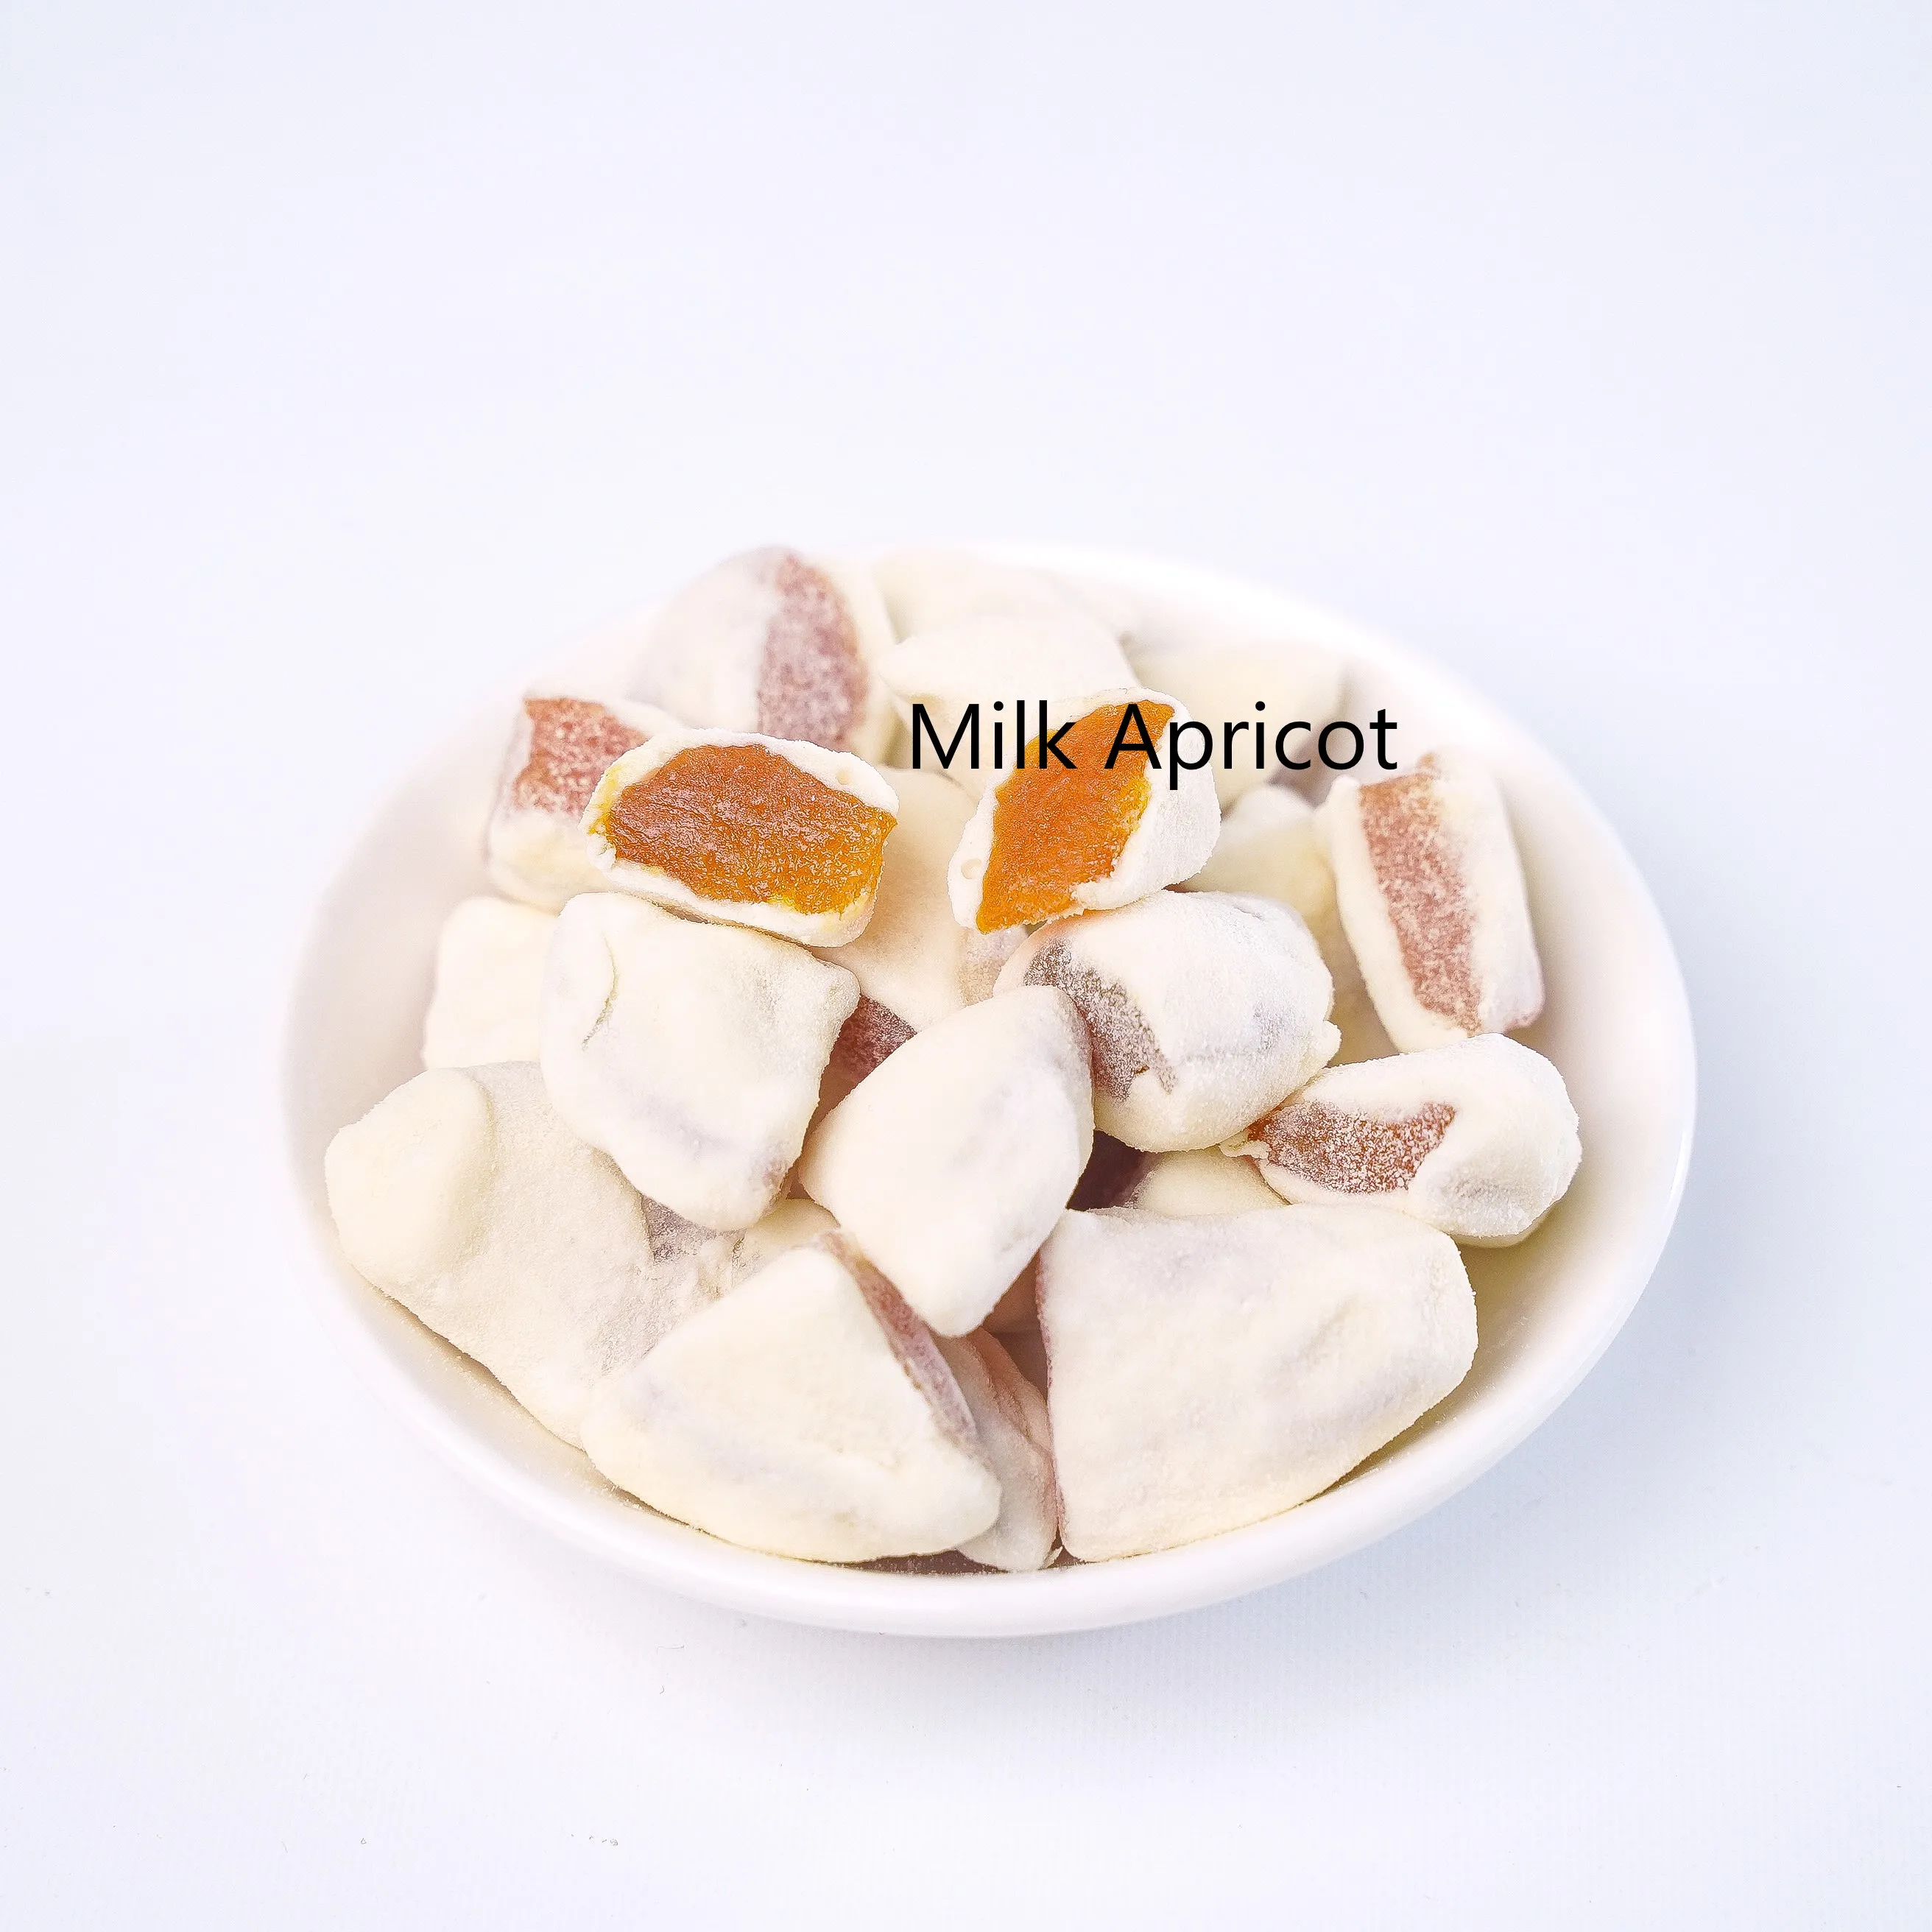 Shenglong 1kg apricot kernel milk dry apricot china dried apricot snack food